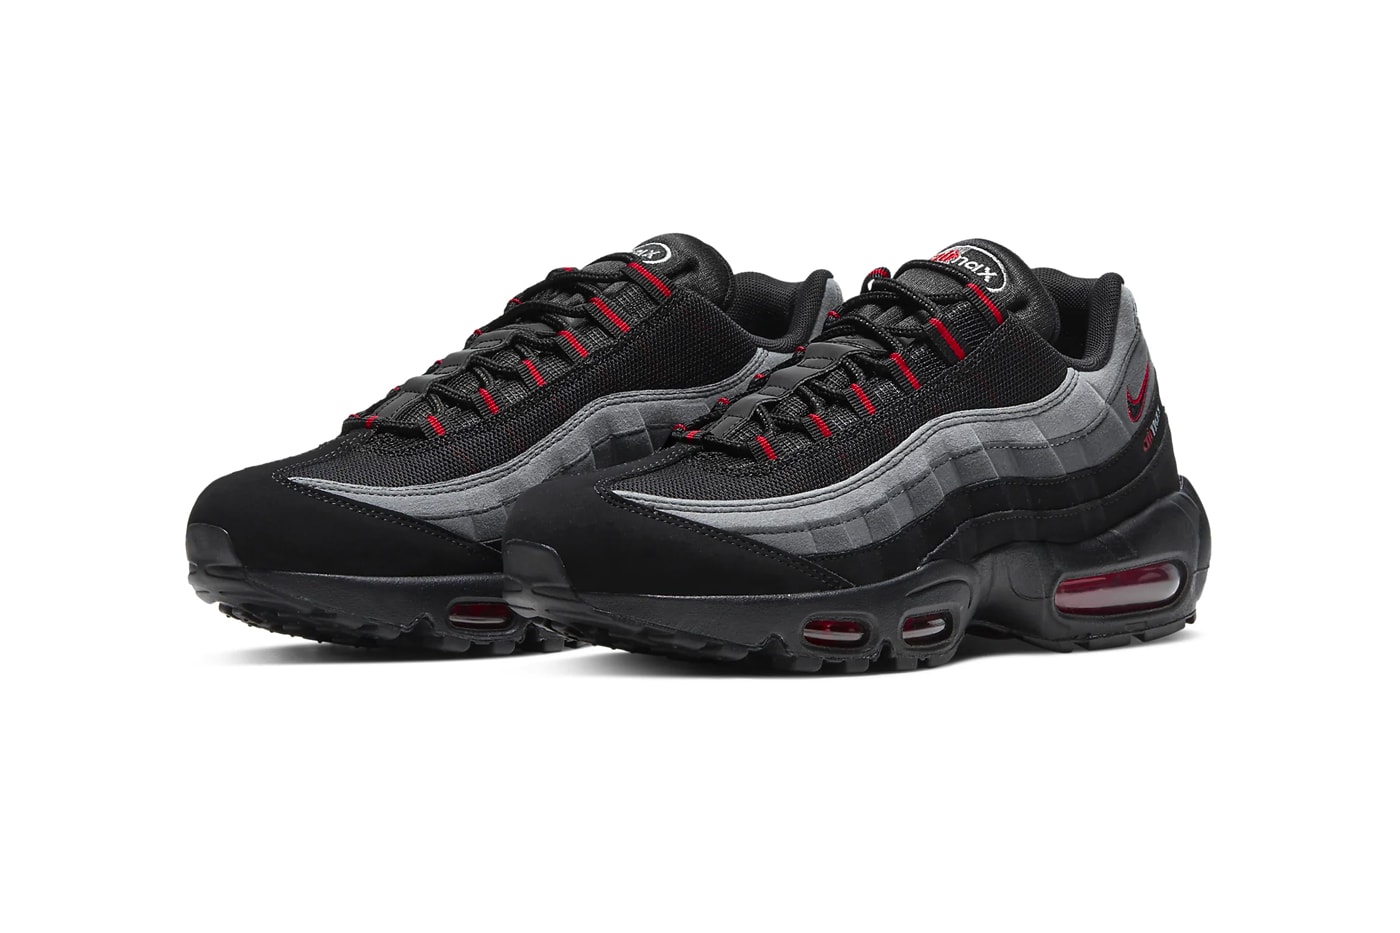 Nike Air Max 95 Iron Gray University Red black sneakers shoes footwear menswear spring summer 2020 collection swoosh runners trainers kicks CW7477 001 air sole unit max air